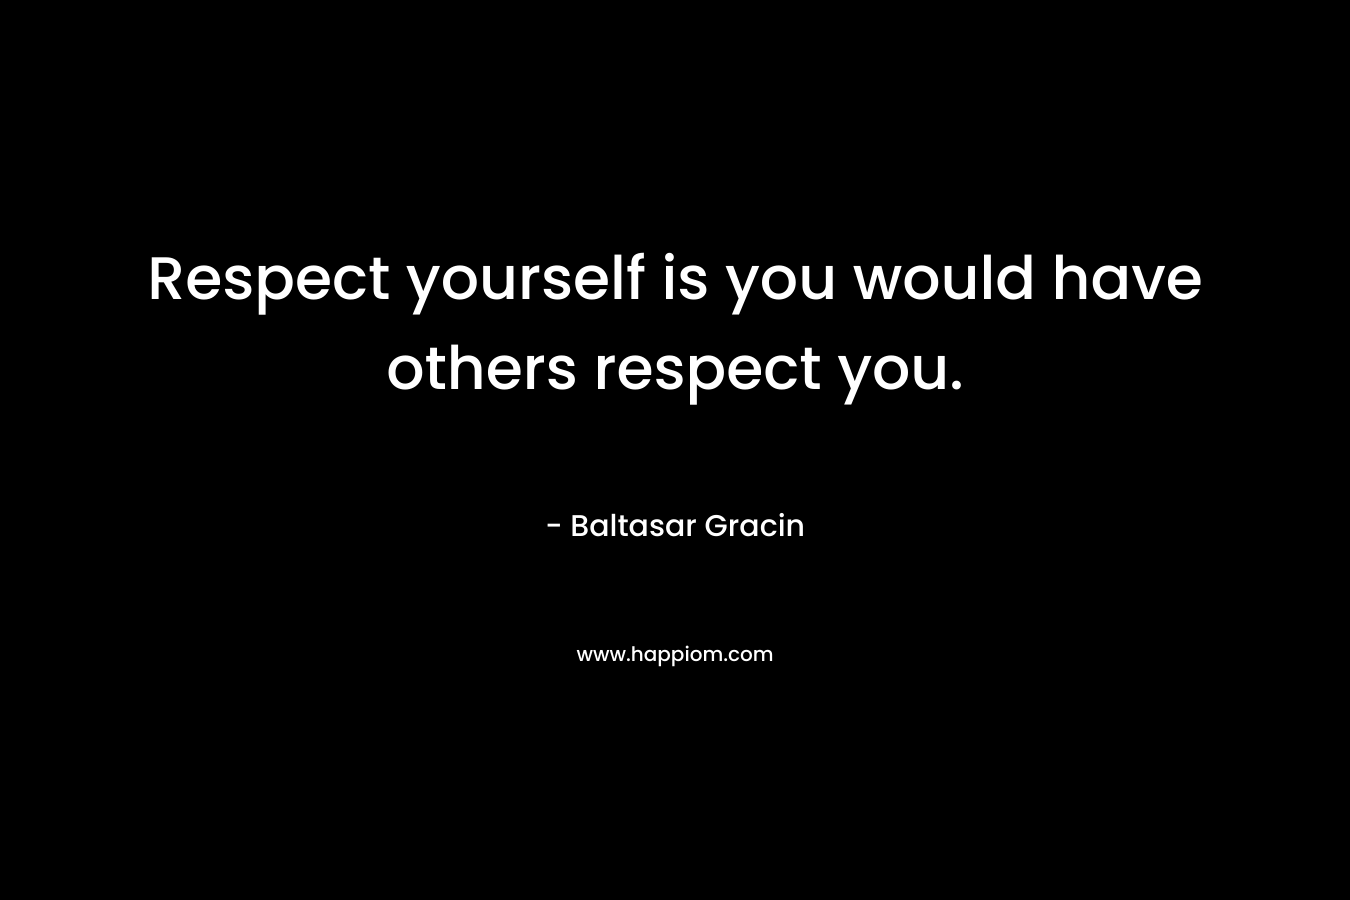 Respect yourself is you would have others respect you.